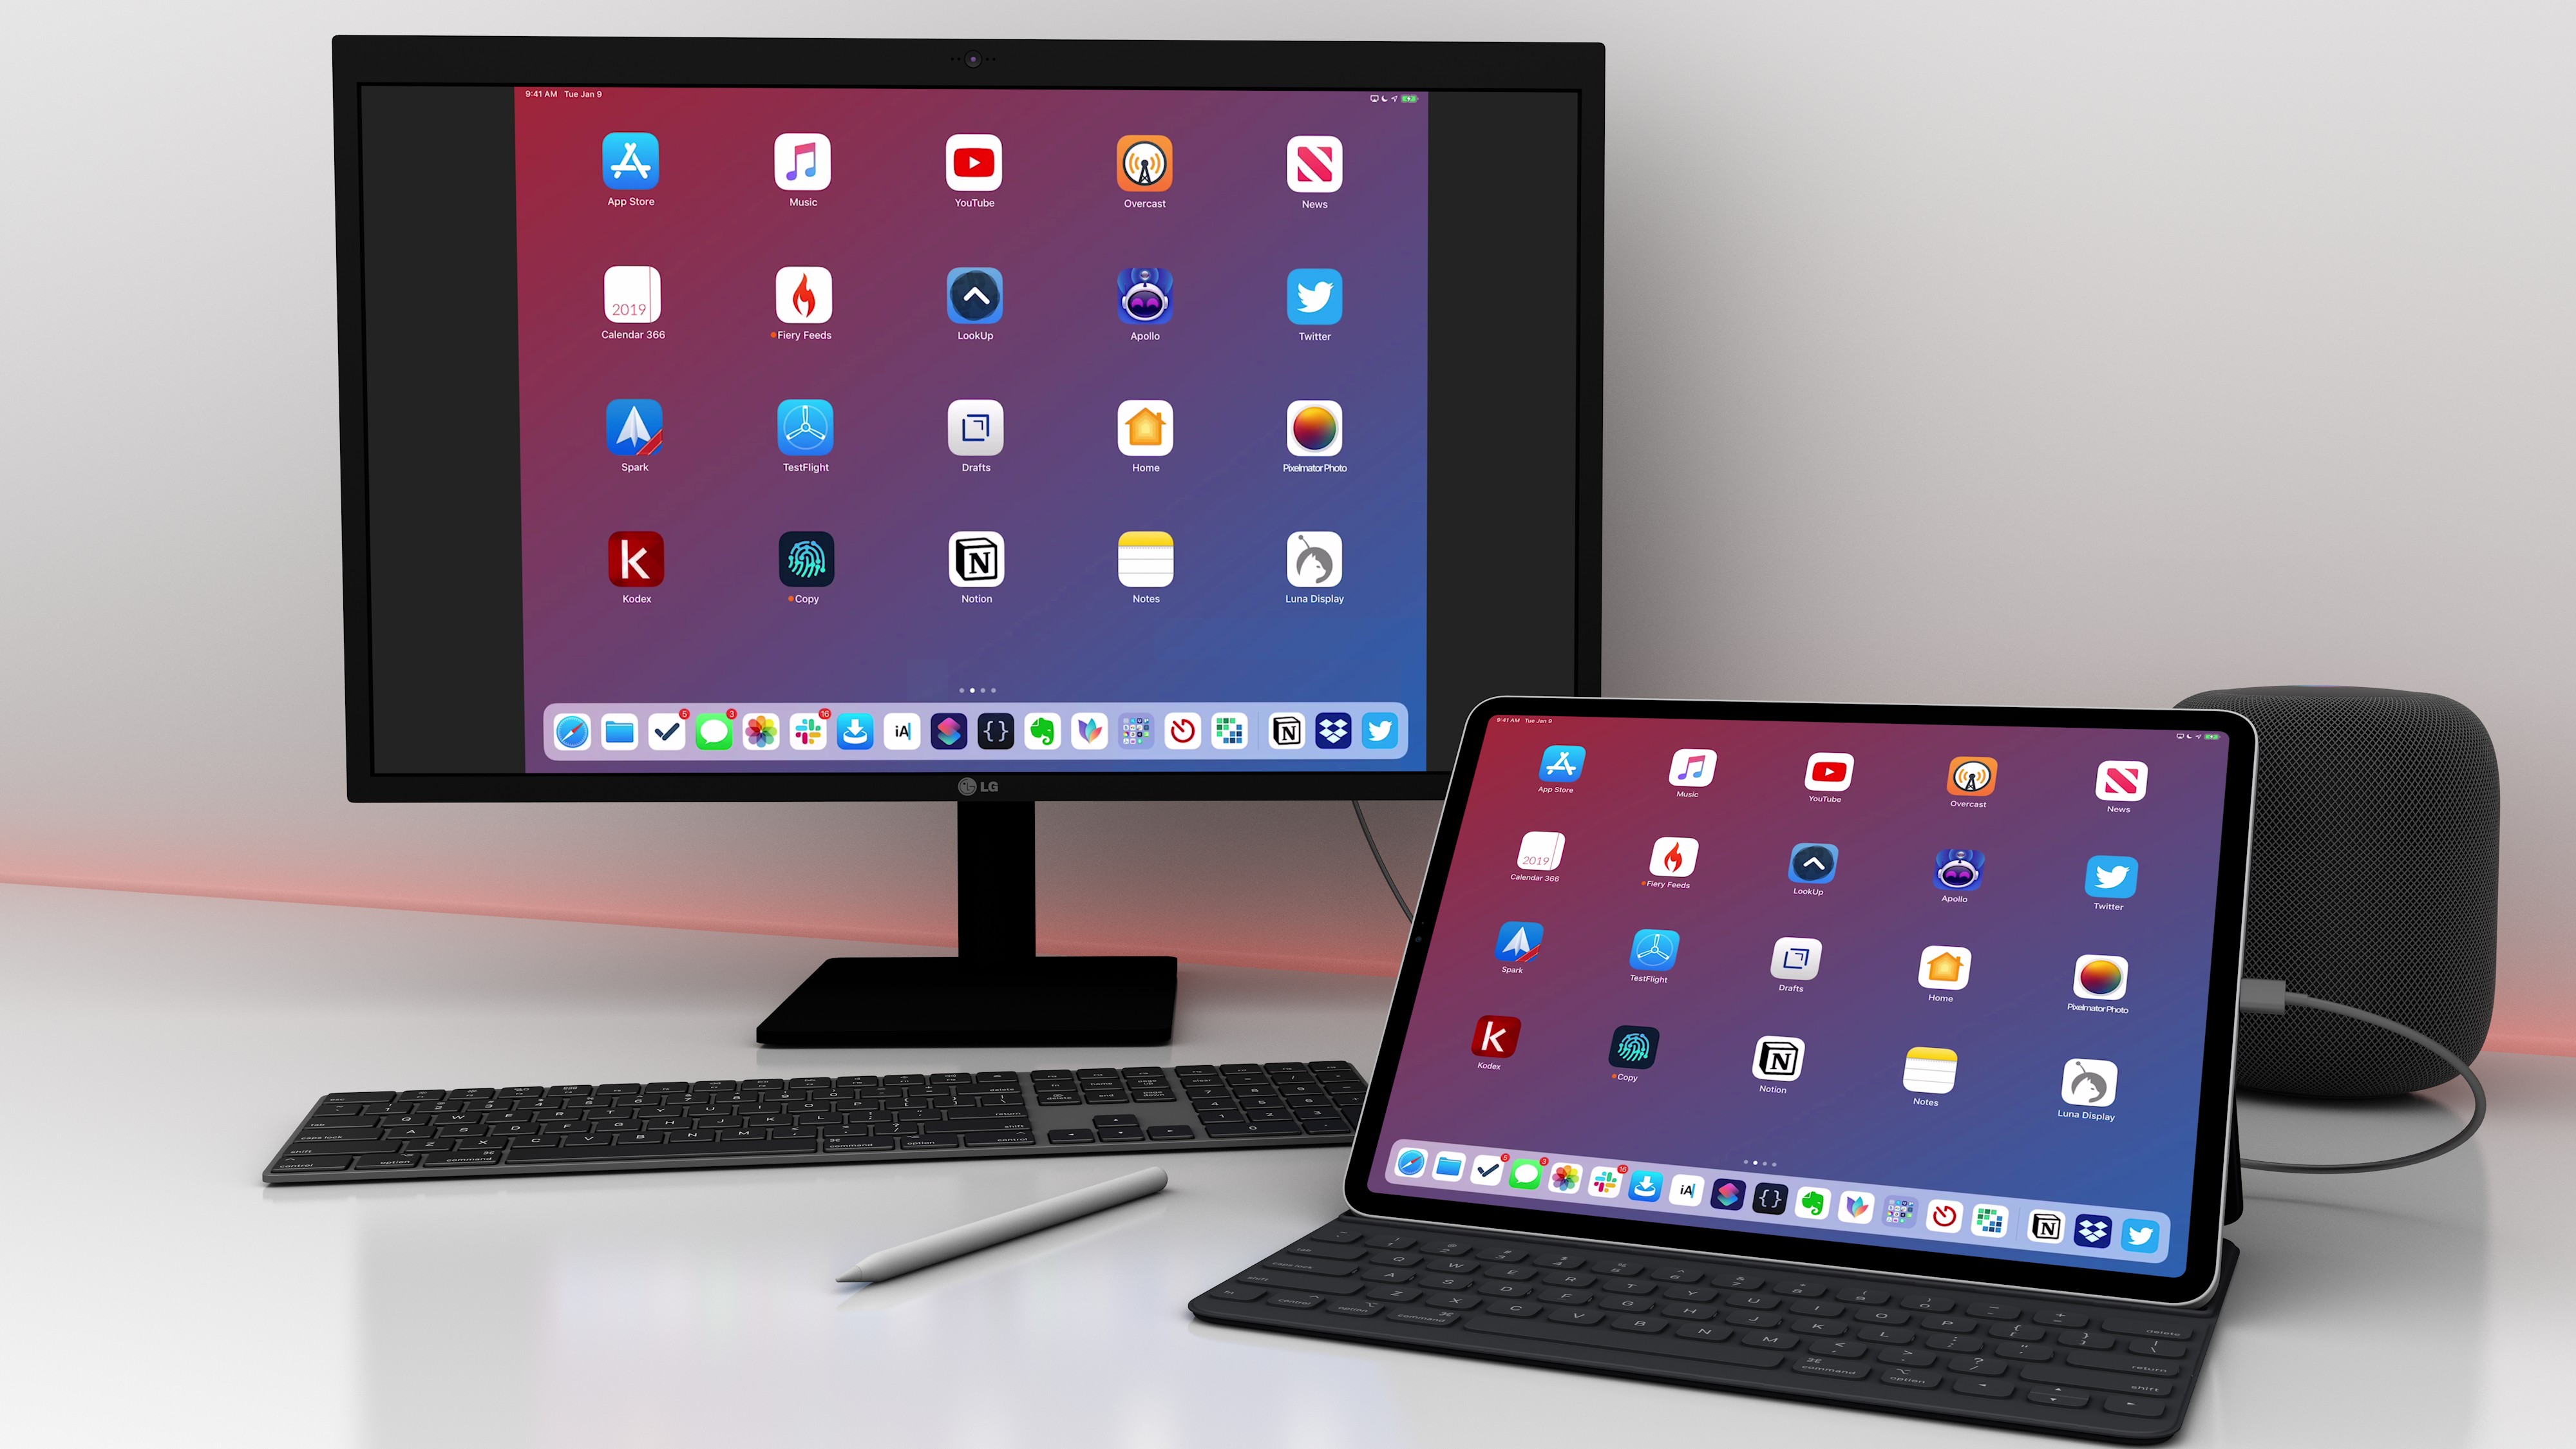 How To Control Your PC From Your IPad